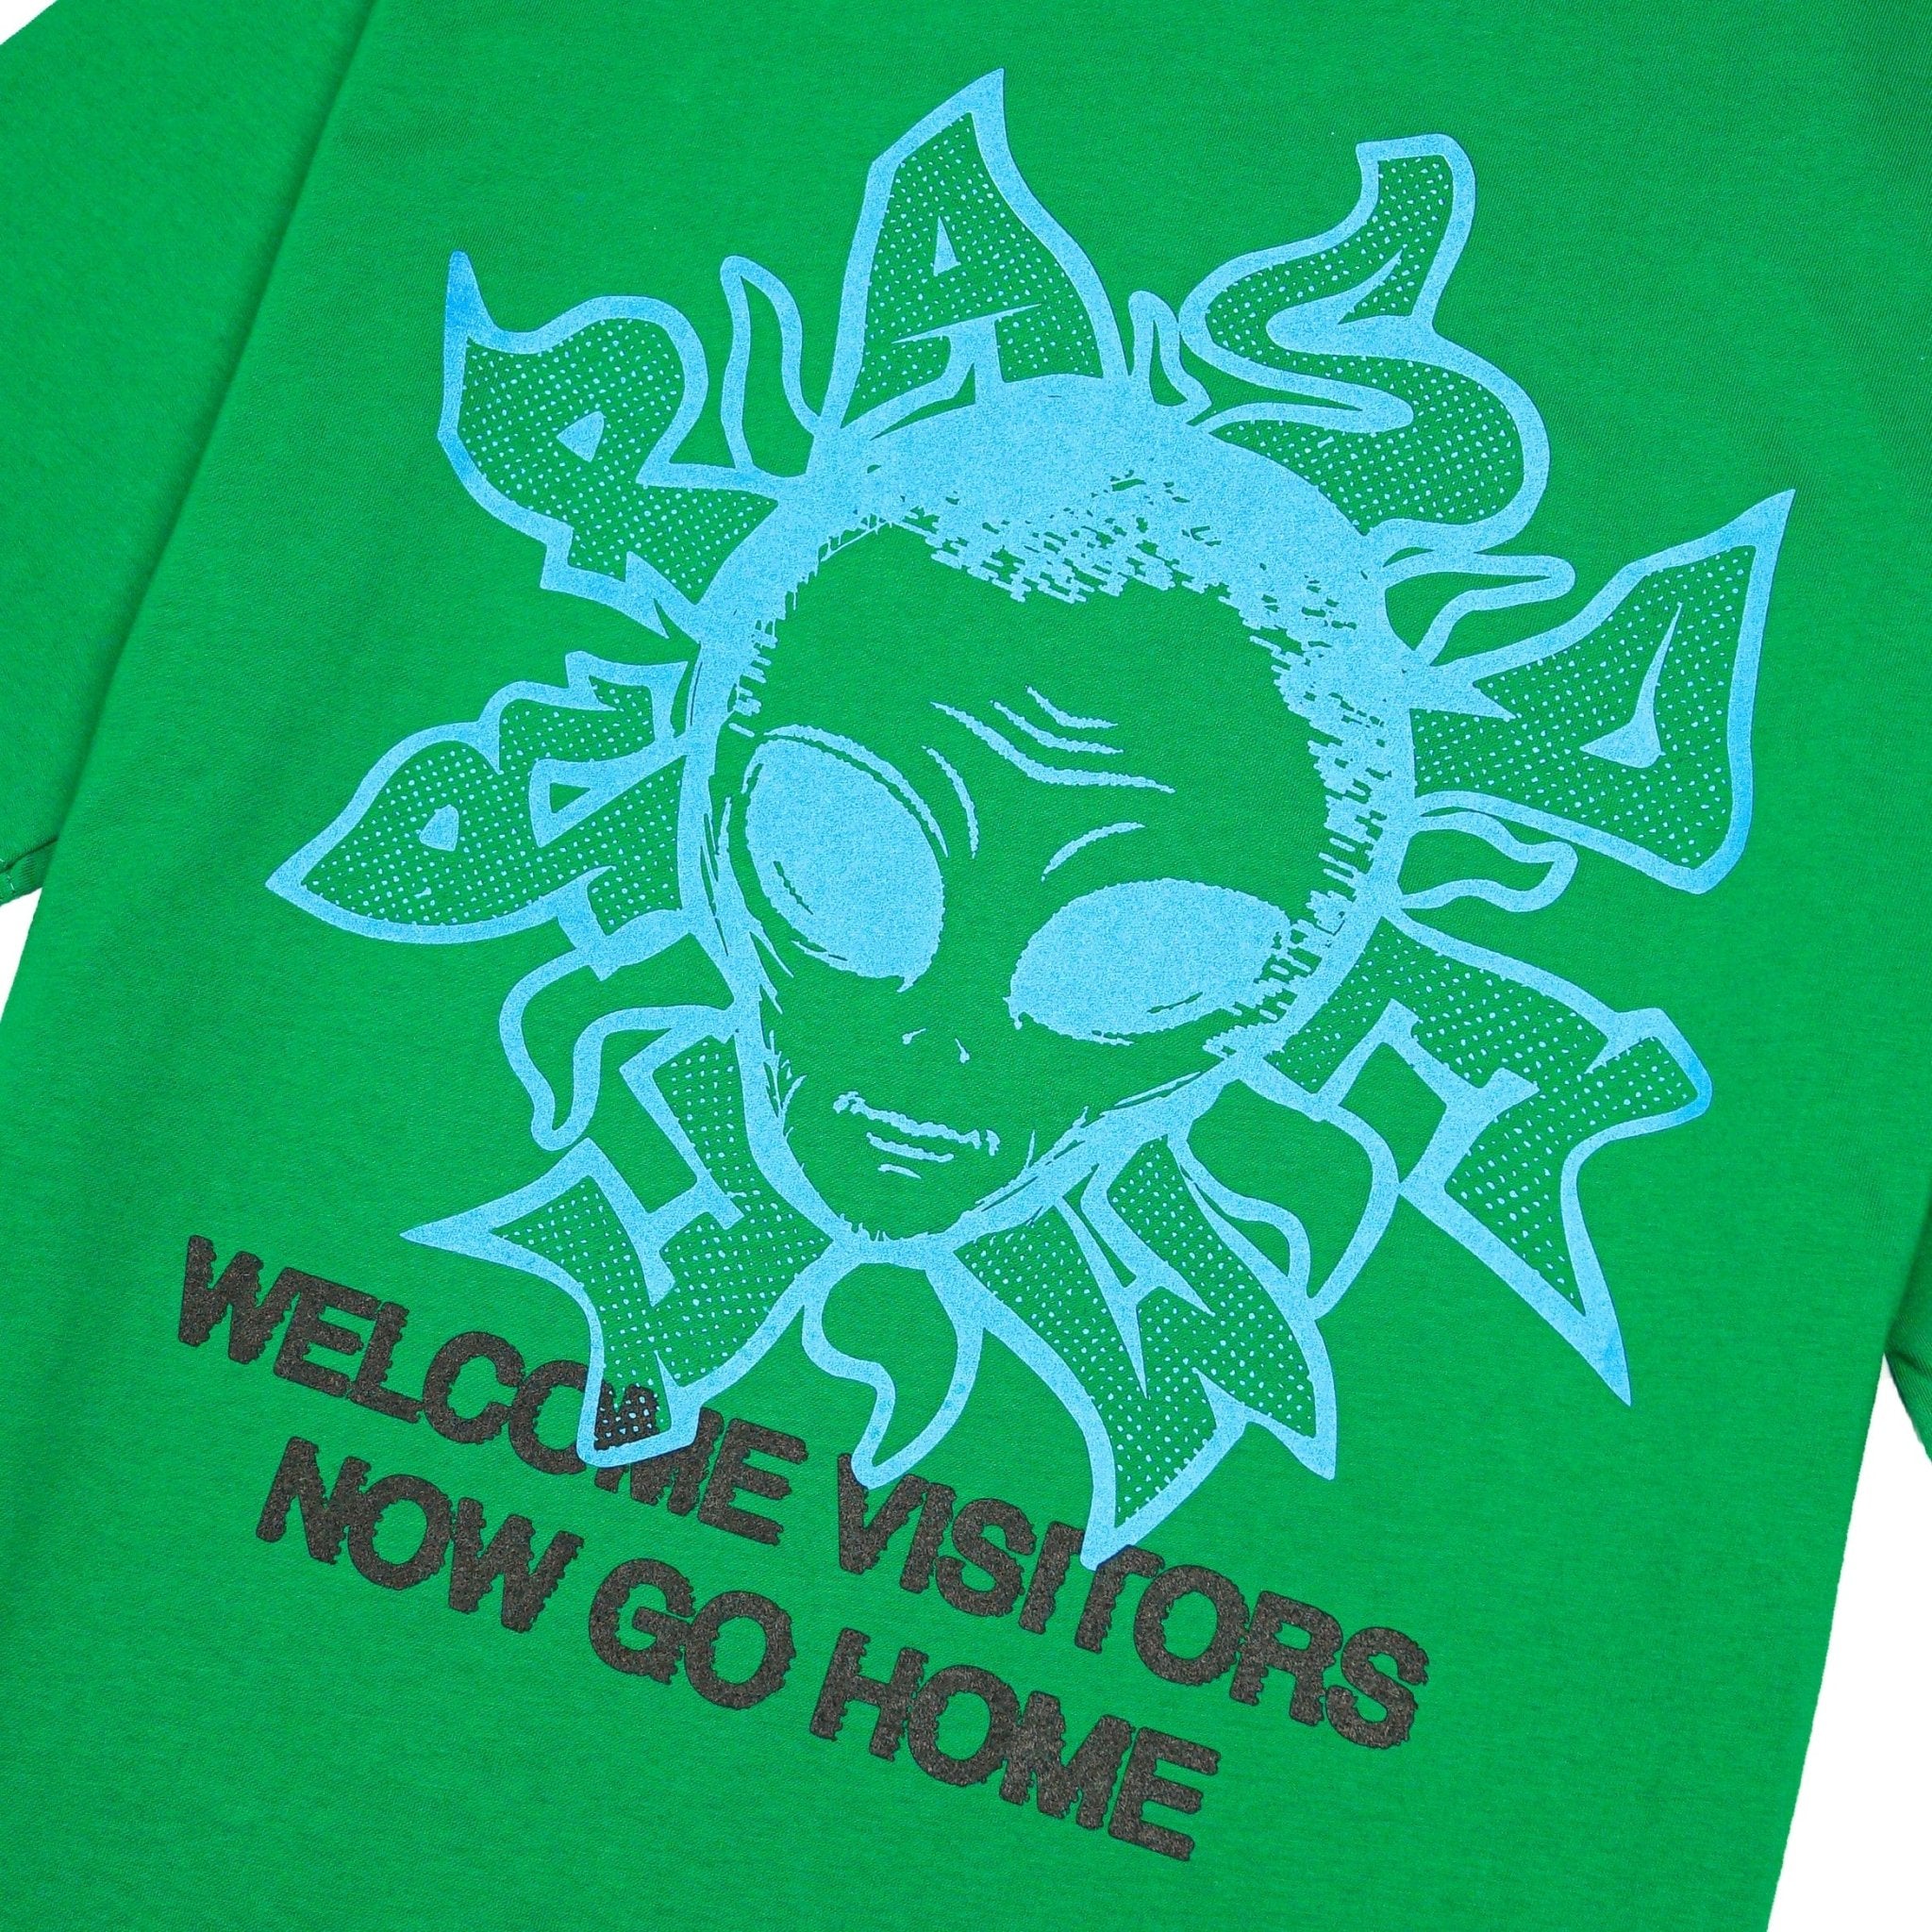 Welcome Visitors Tee in green - Pas de Mer - State Of Flux